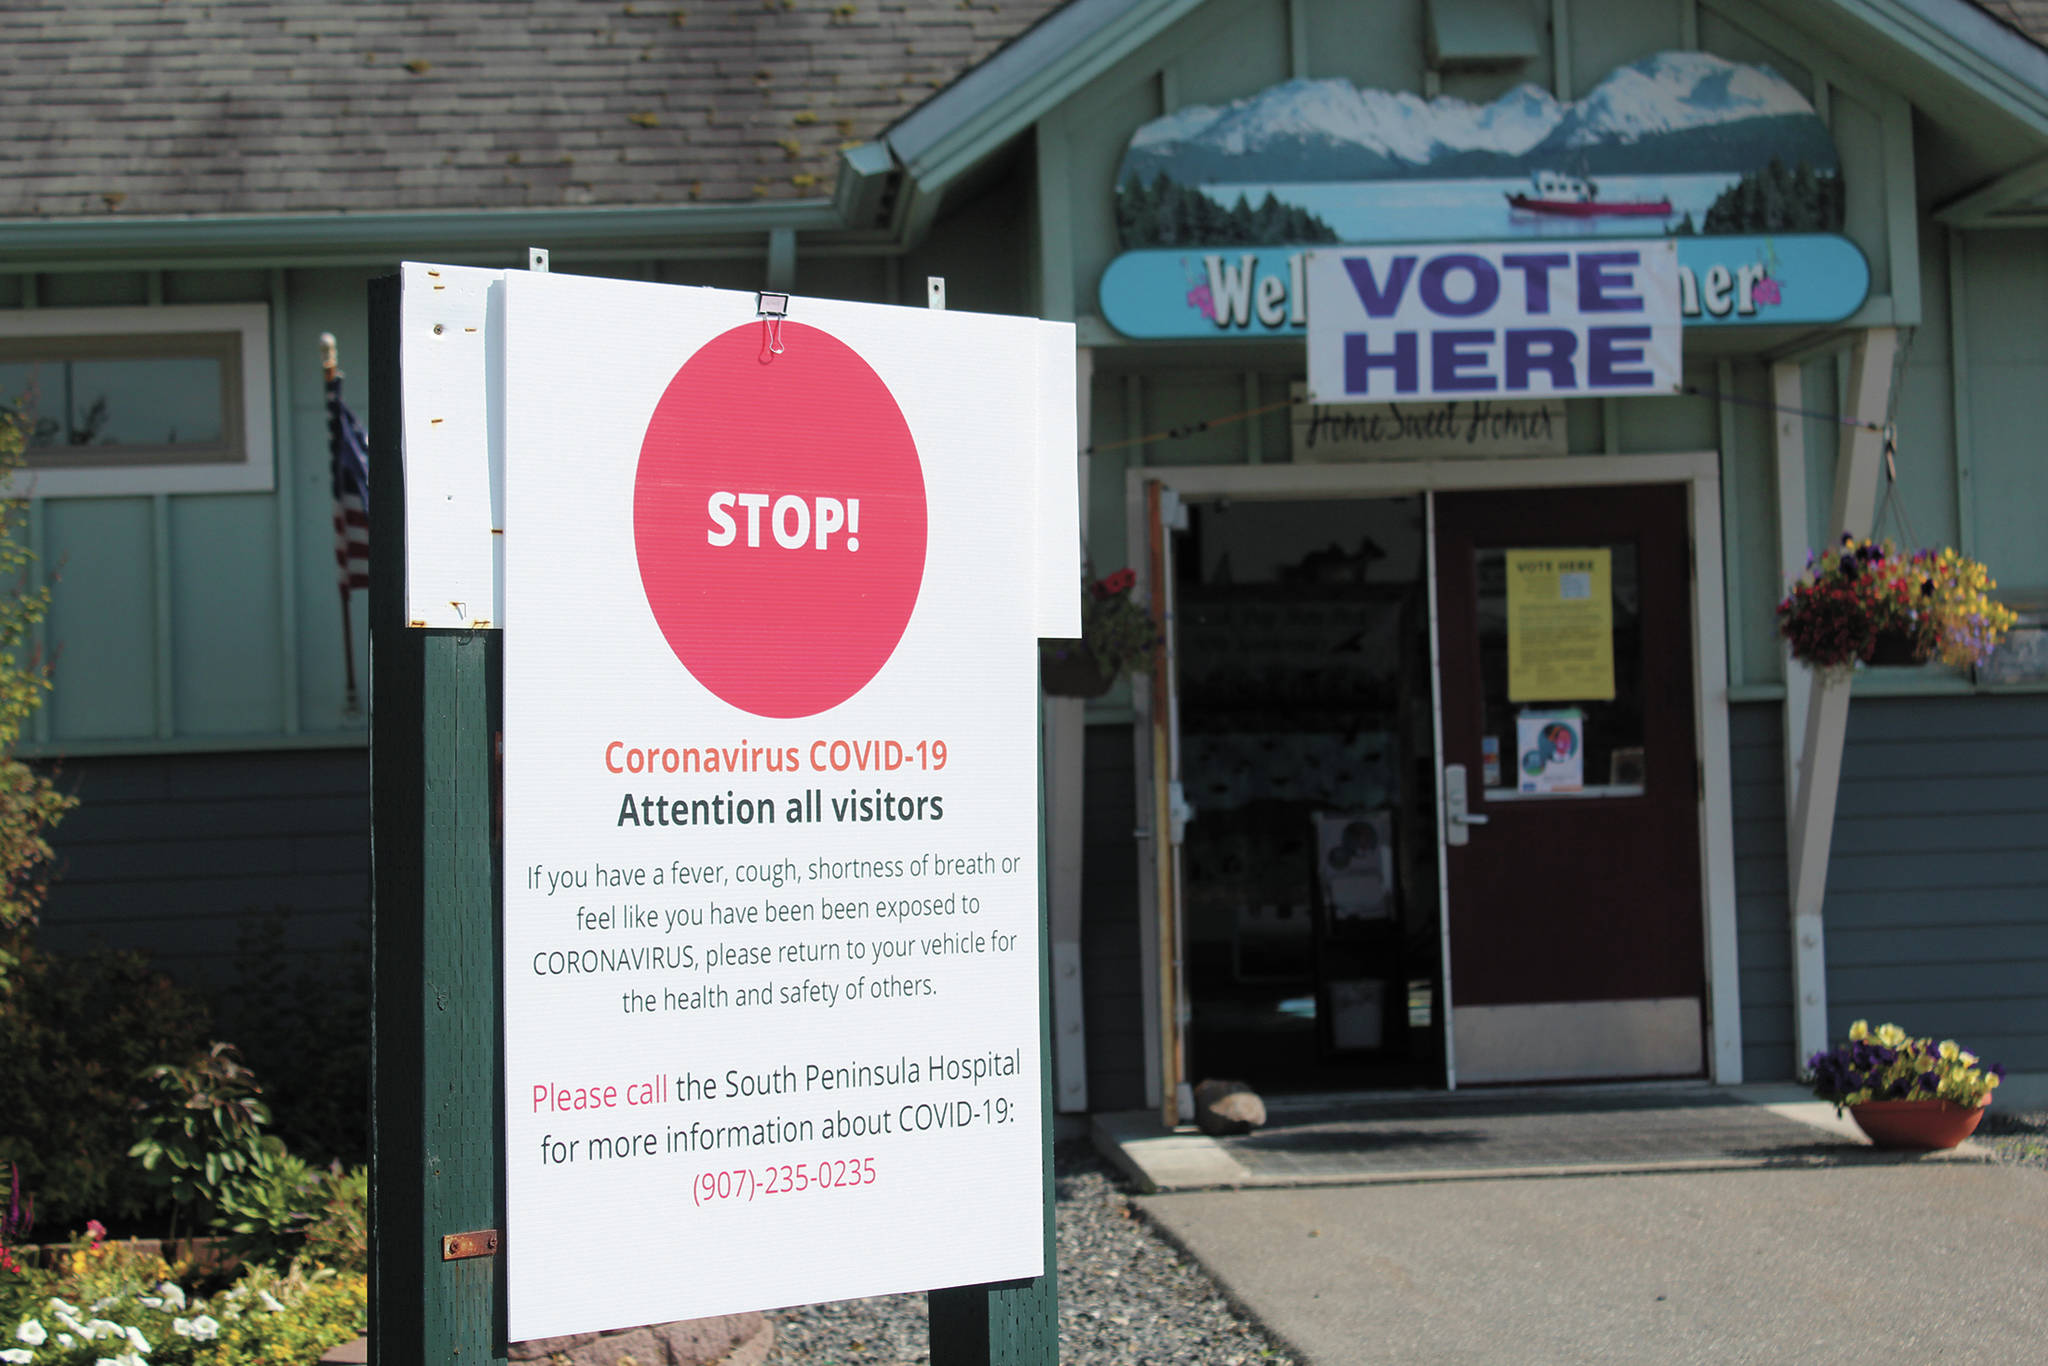 A sign outside the Homer Chamber of Commerce and Visitor Center warns voters about COVID-19 precautions being taken during the Primary Election on Tuesday, Aug. 18, 2020 in Homer, Alaska. (Photo by Megan Pacer/Homer News)